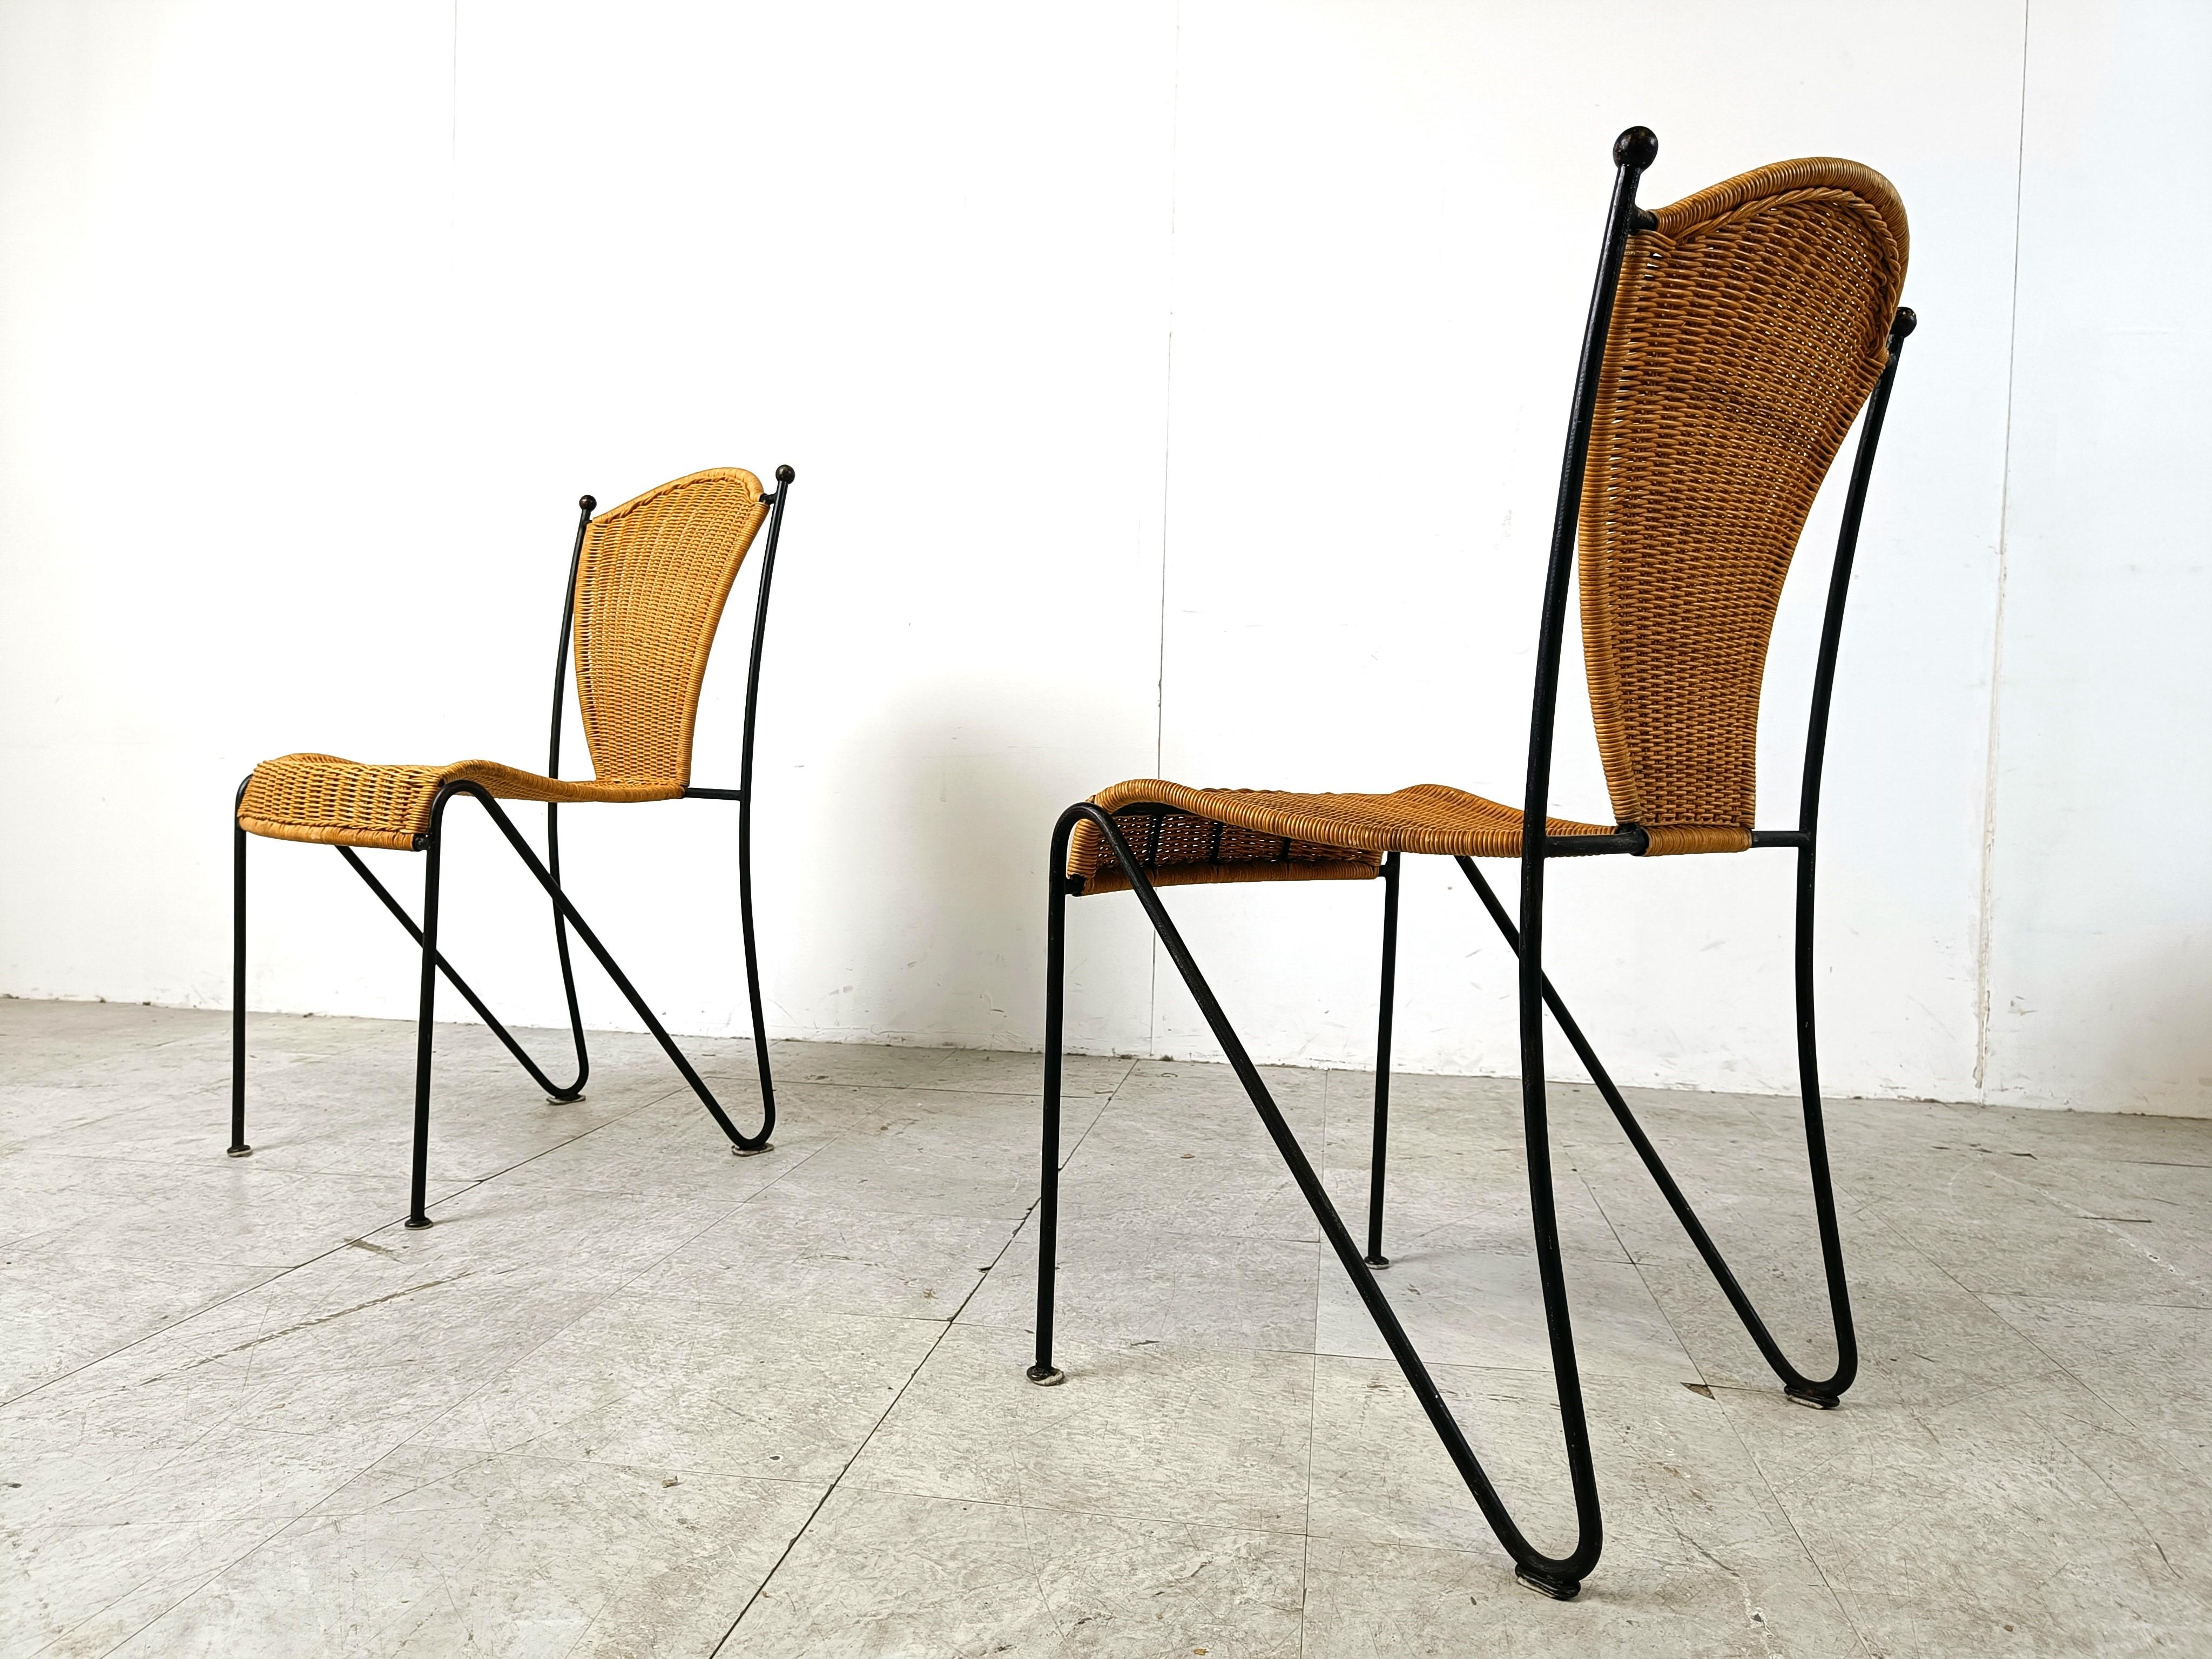 Vintage wrought iron and wicker bistro/dining chairs designed by Frederick Weinberg.

Elegant black wrought frame with a curvy wicker seat.

Very sturdy chairs good for in home and outside use.

1960s - France

Very good